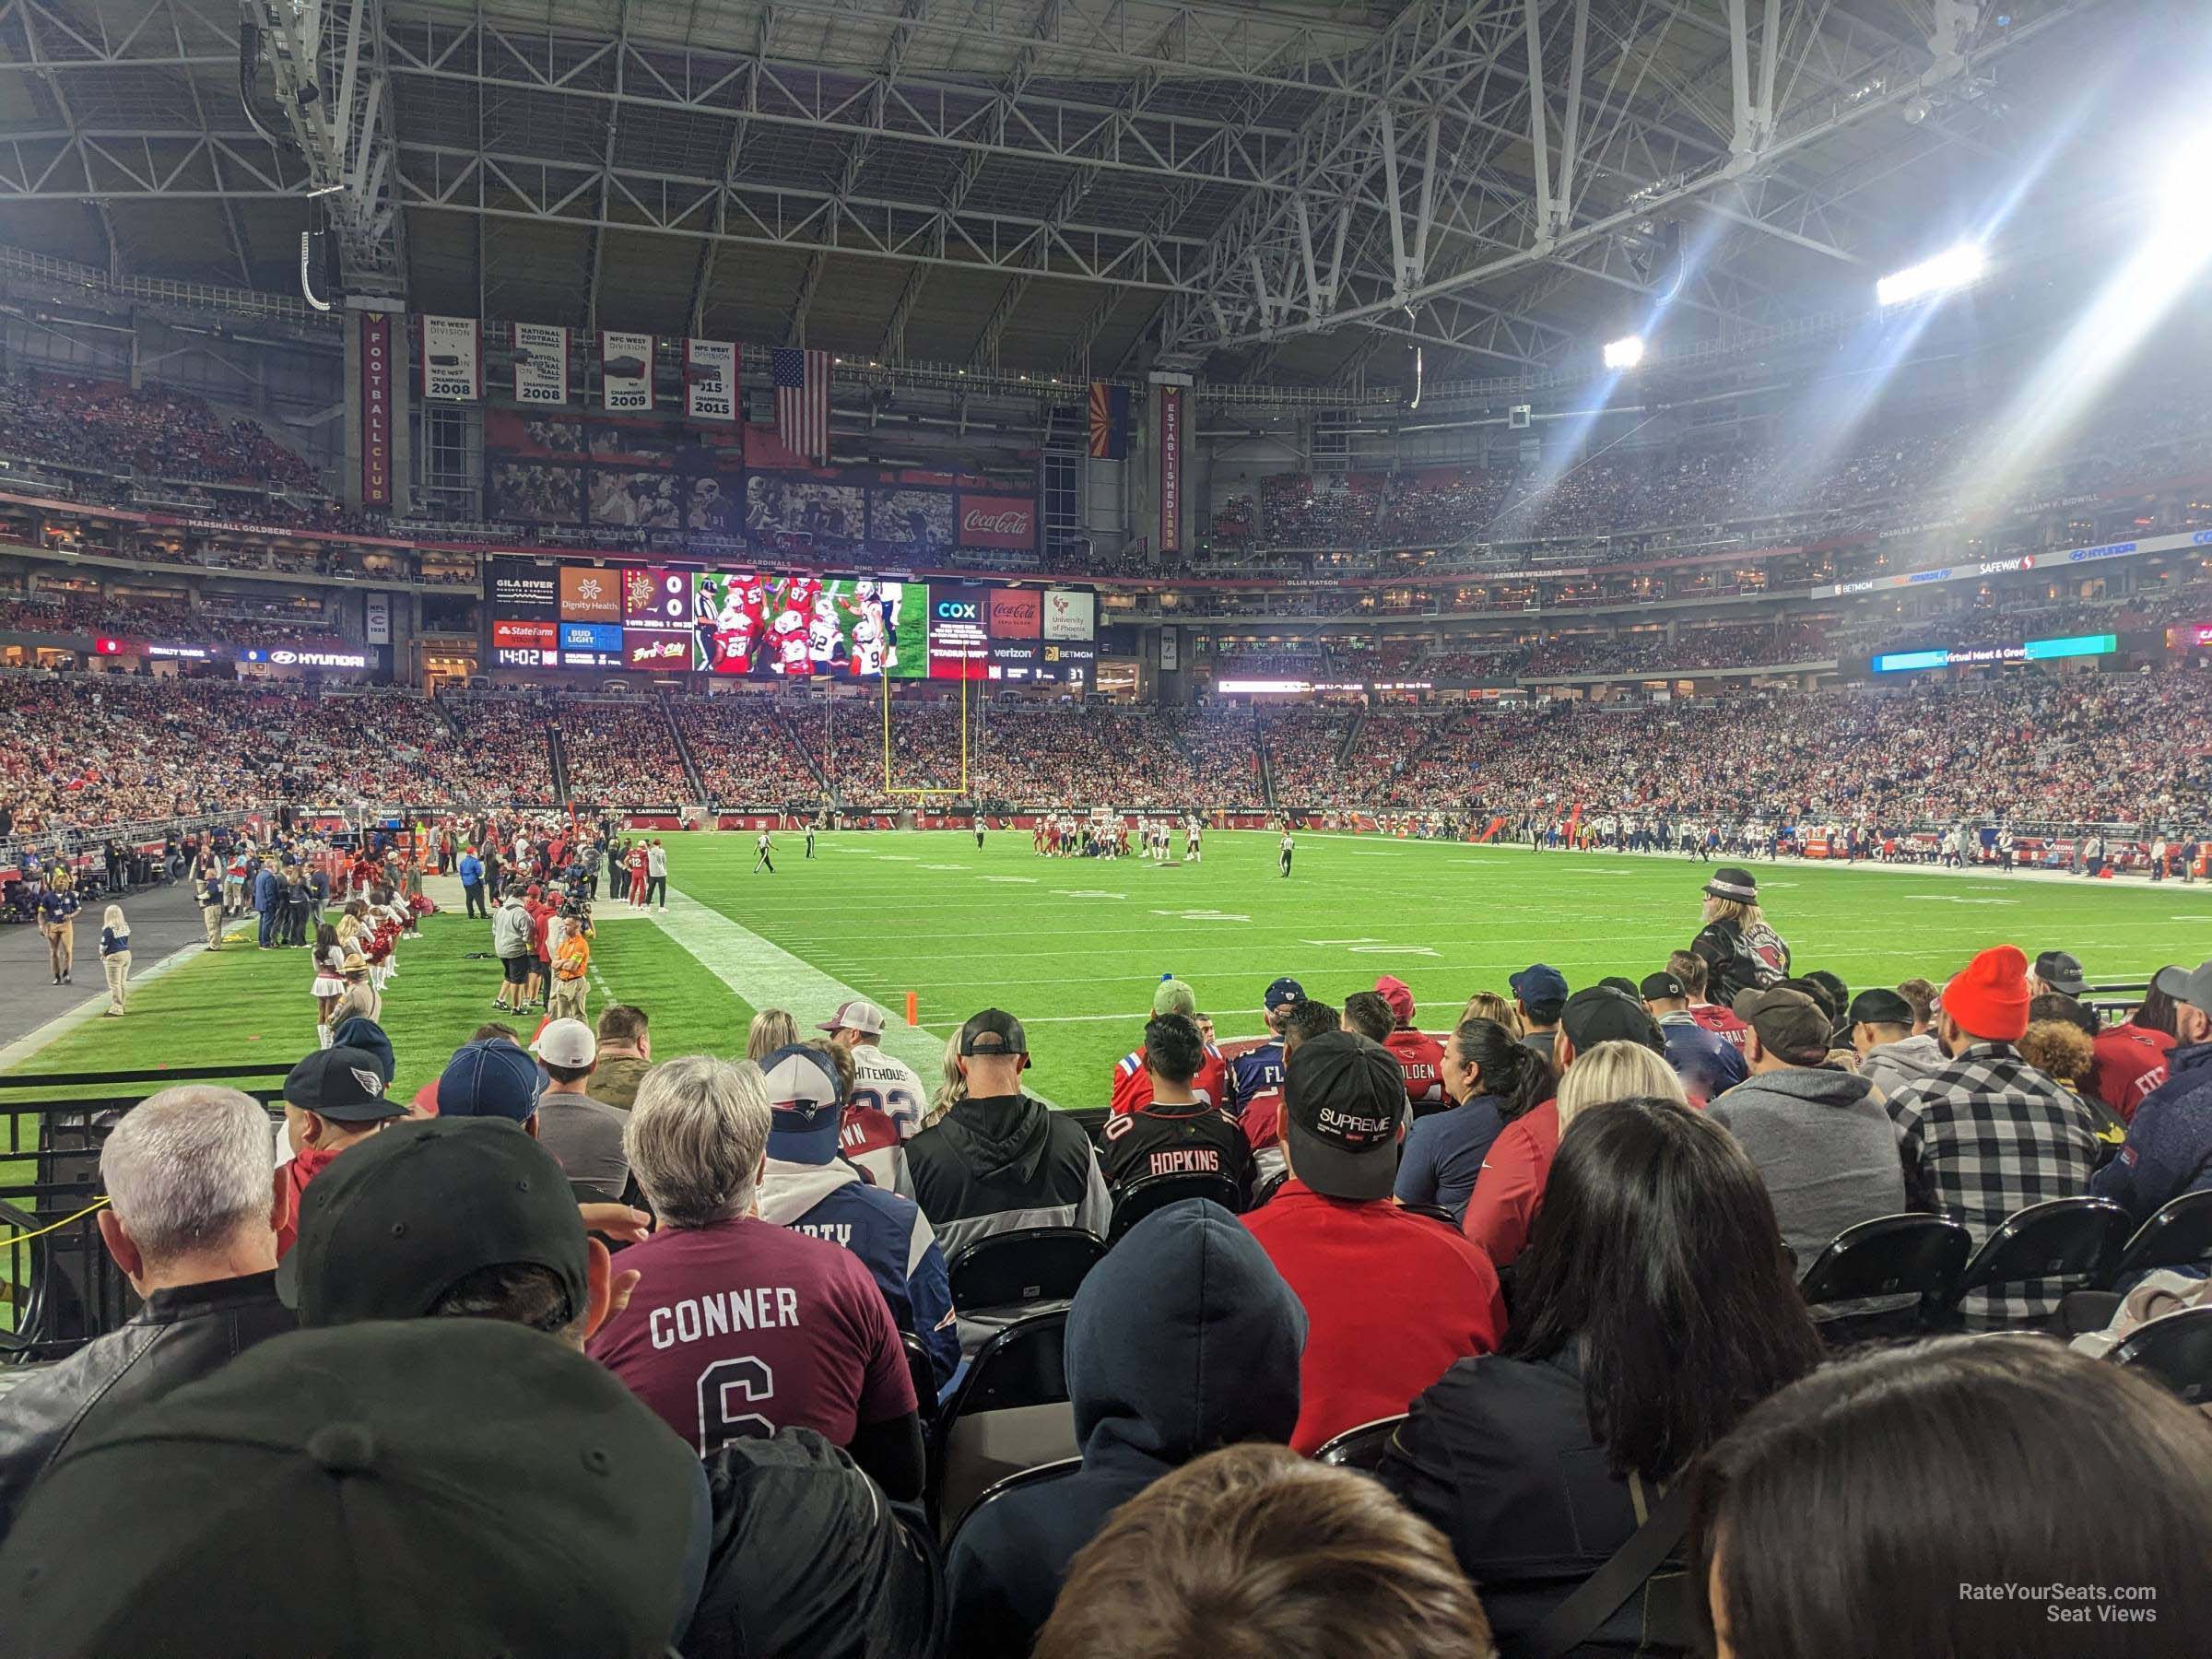 section 144, row 7 seat view  for football - state farm stadium